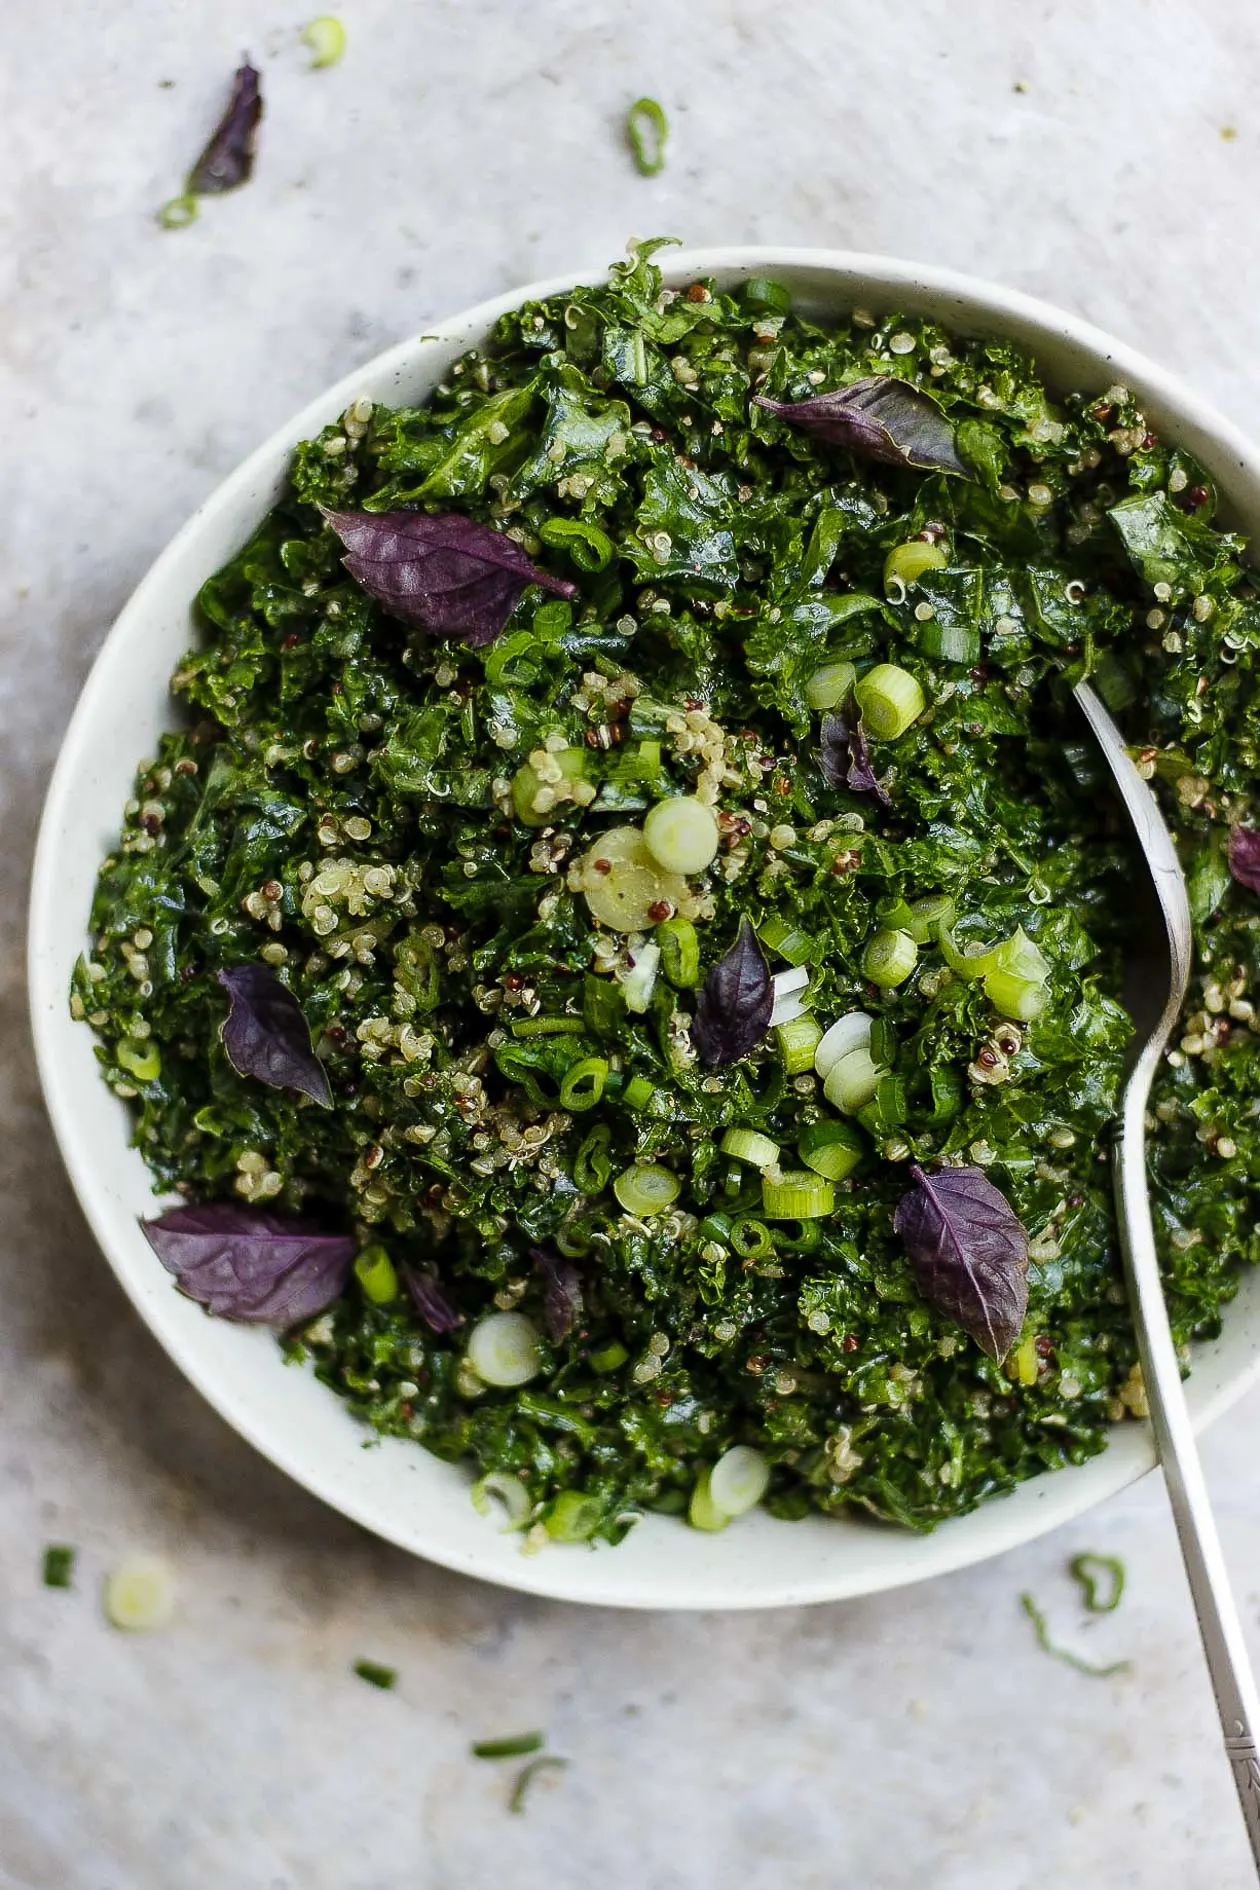 Green Quinoa Salad with Basil Dressing | A super green quinoa salad full of powerhouse super-foods like kale, scallions, quinoa and dressed in a simple, vegan creamy basil dressing.